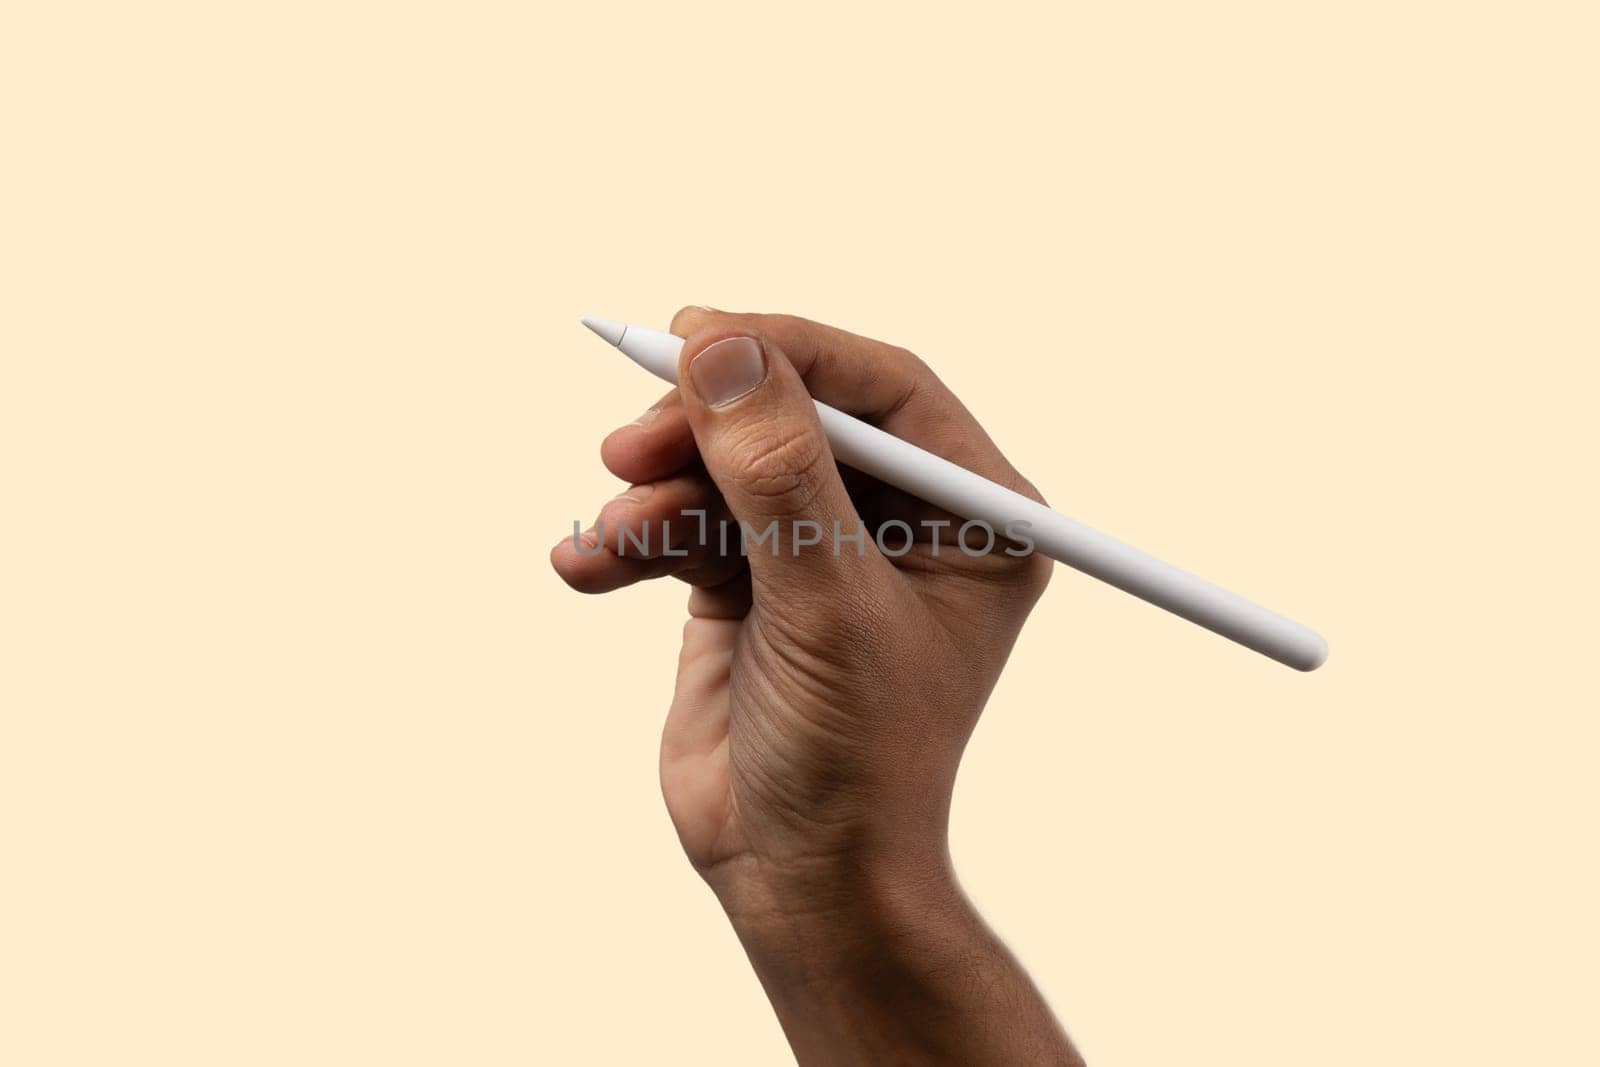 Black male hand holding smart pencil on light beige background, isolated. High quality photo